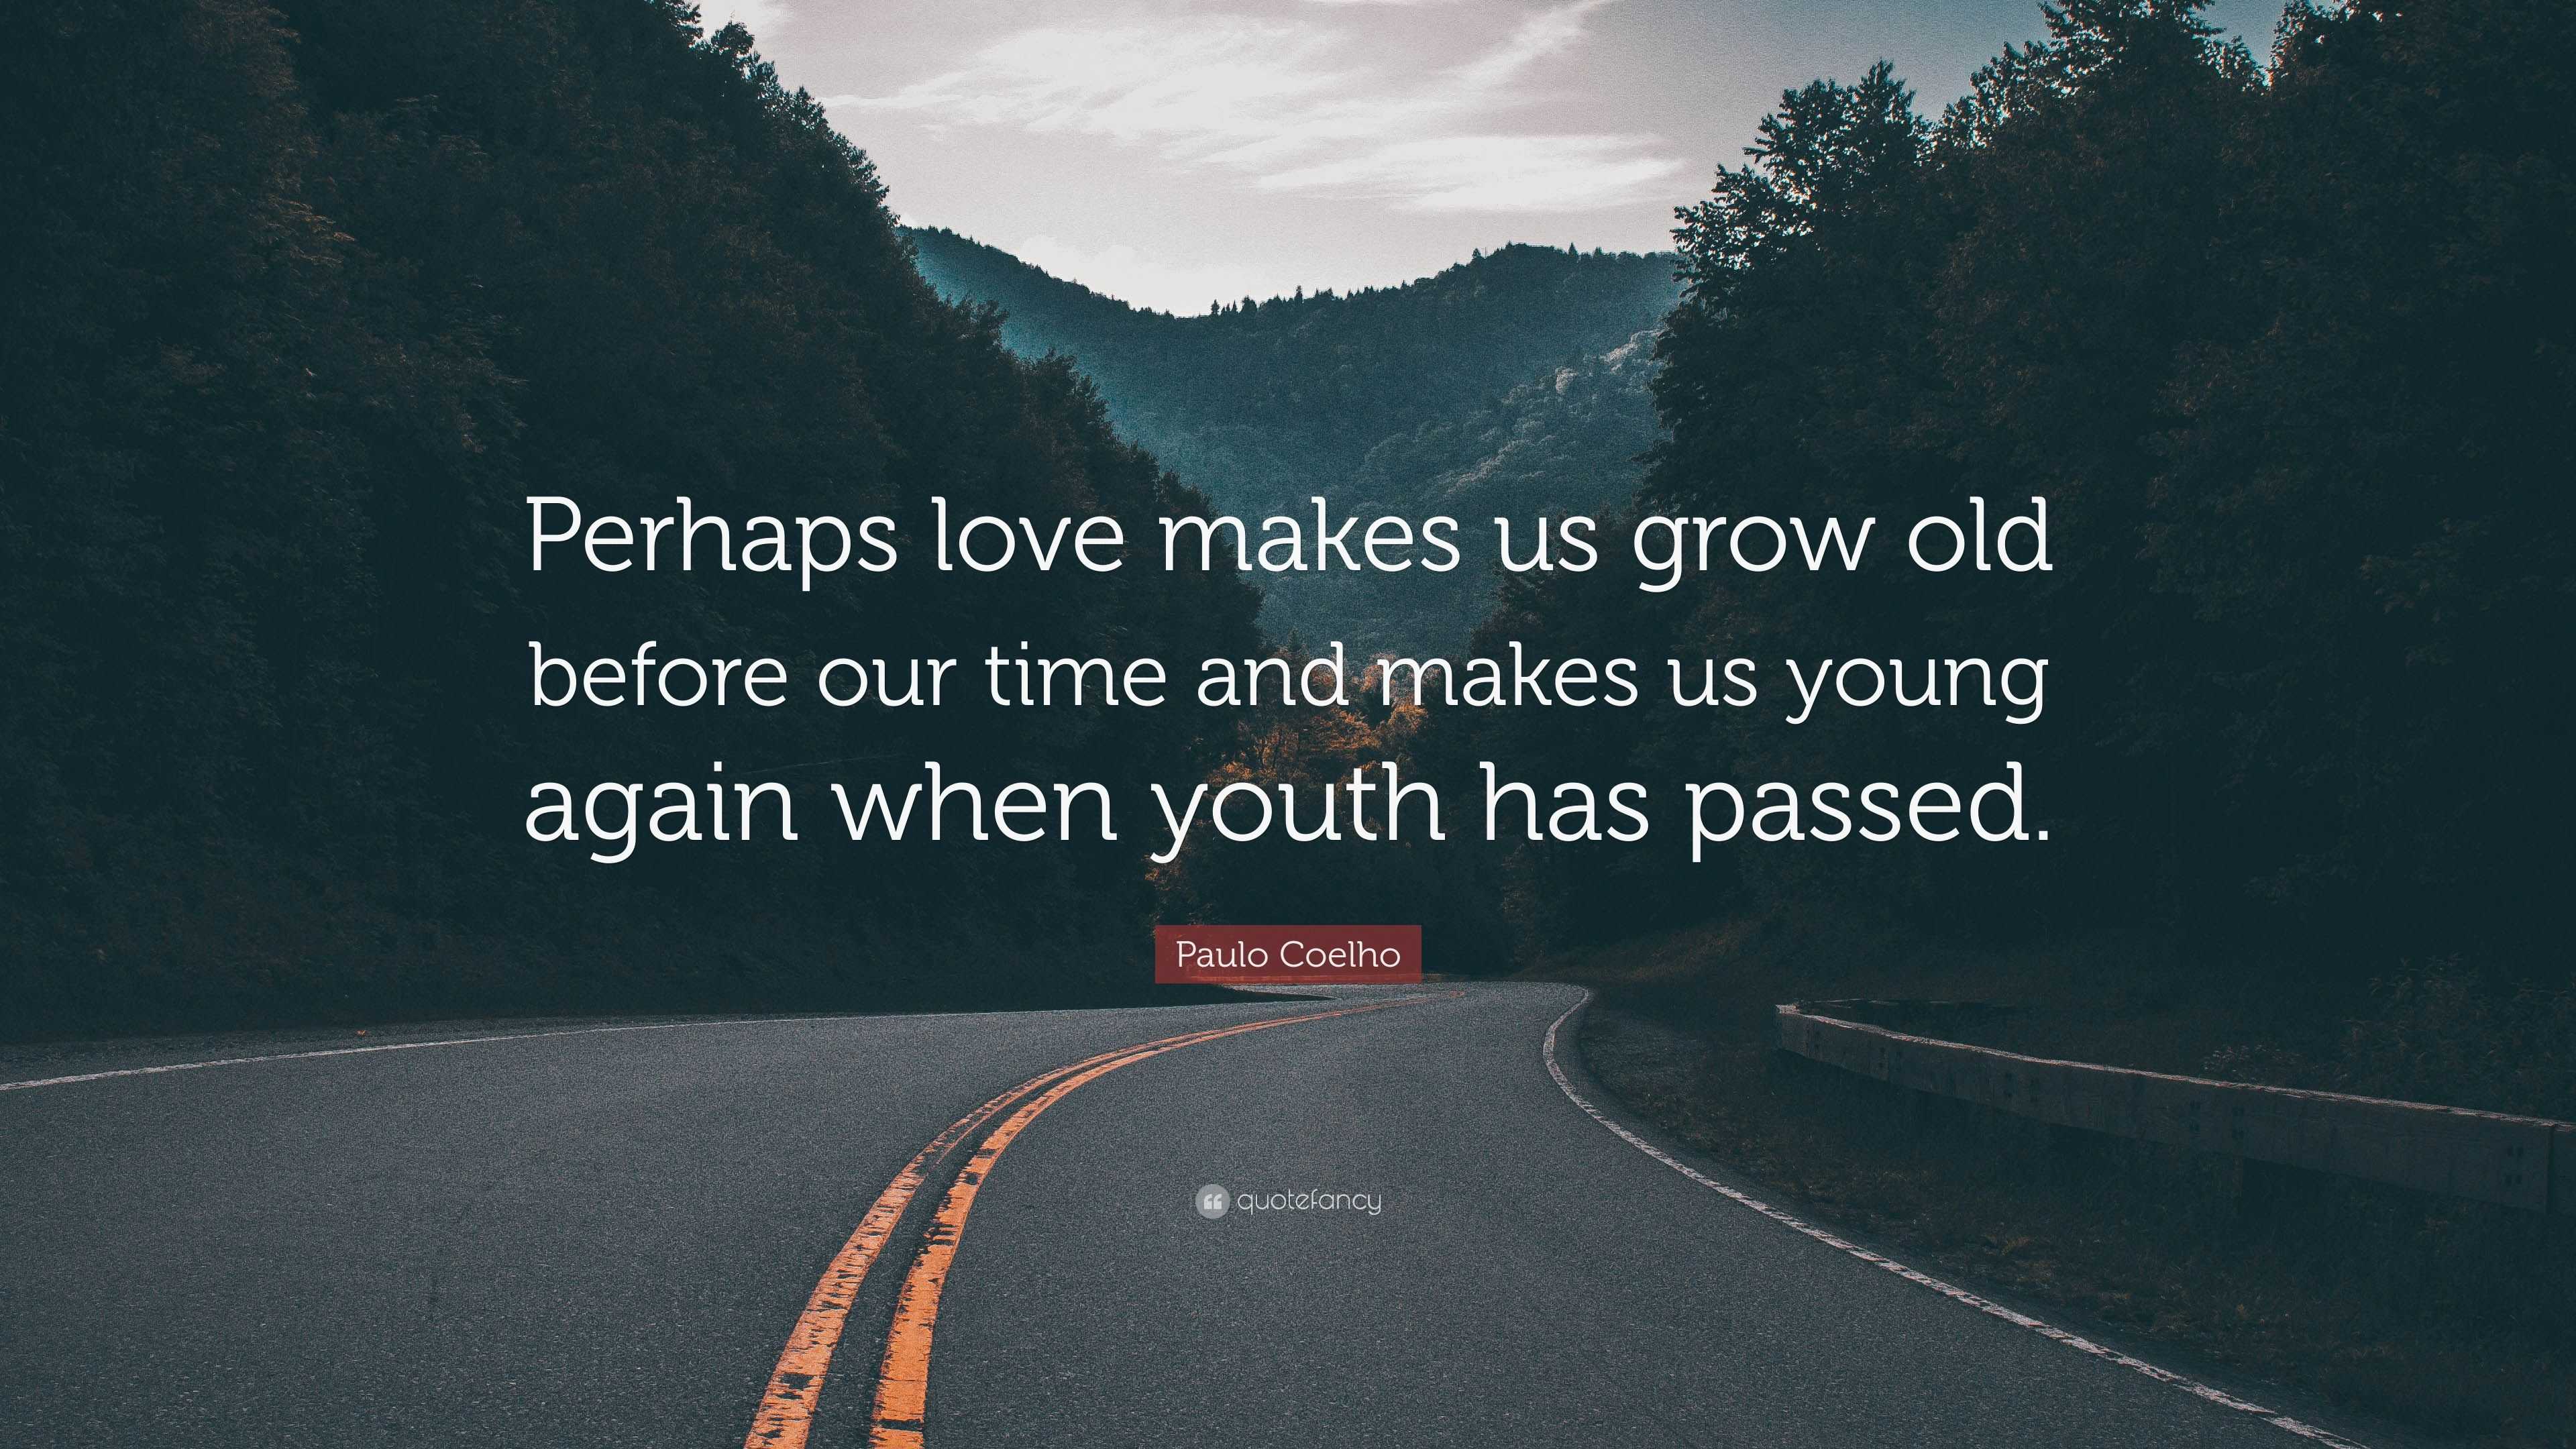 Paulo Coelho Quote: “Perhaps love makes us grow old before our time and us